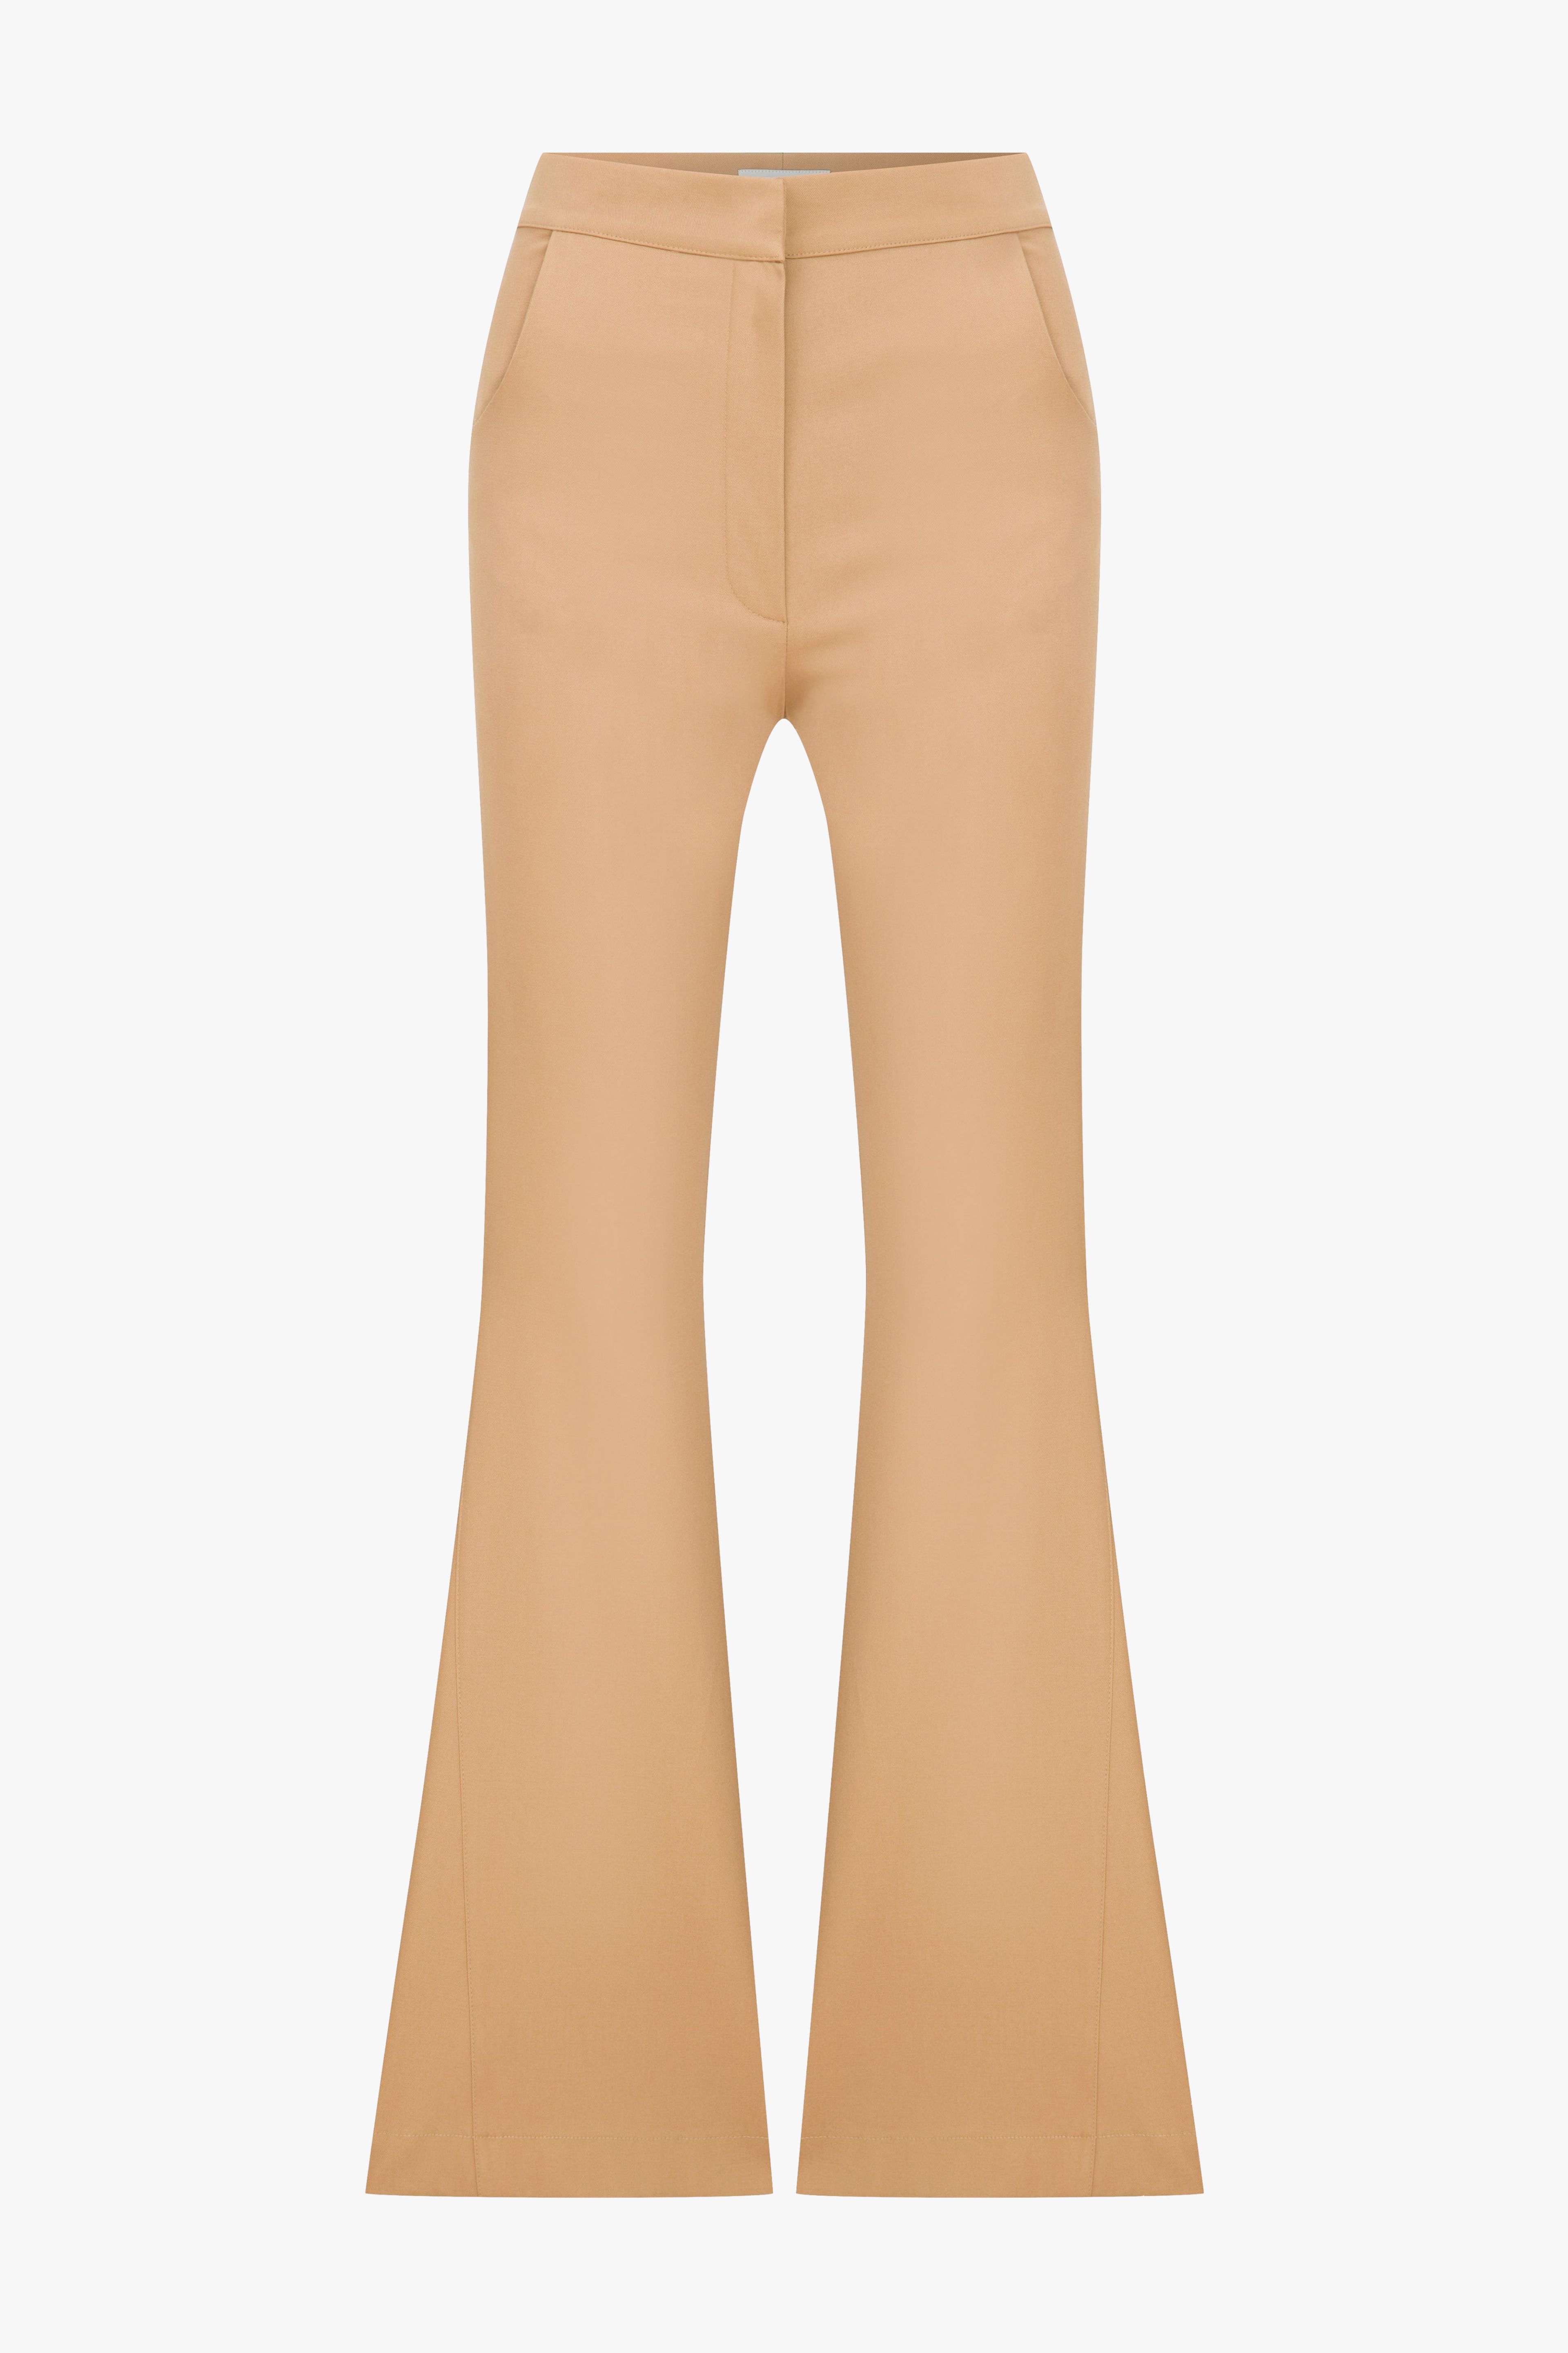 Shop Avrell Cotton Flared Trousers In Golden Straw from Nazli Ceren at  Seezona